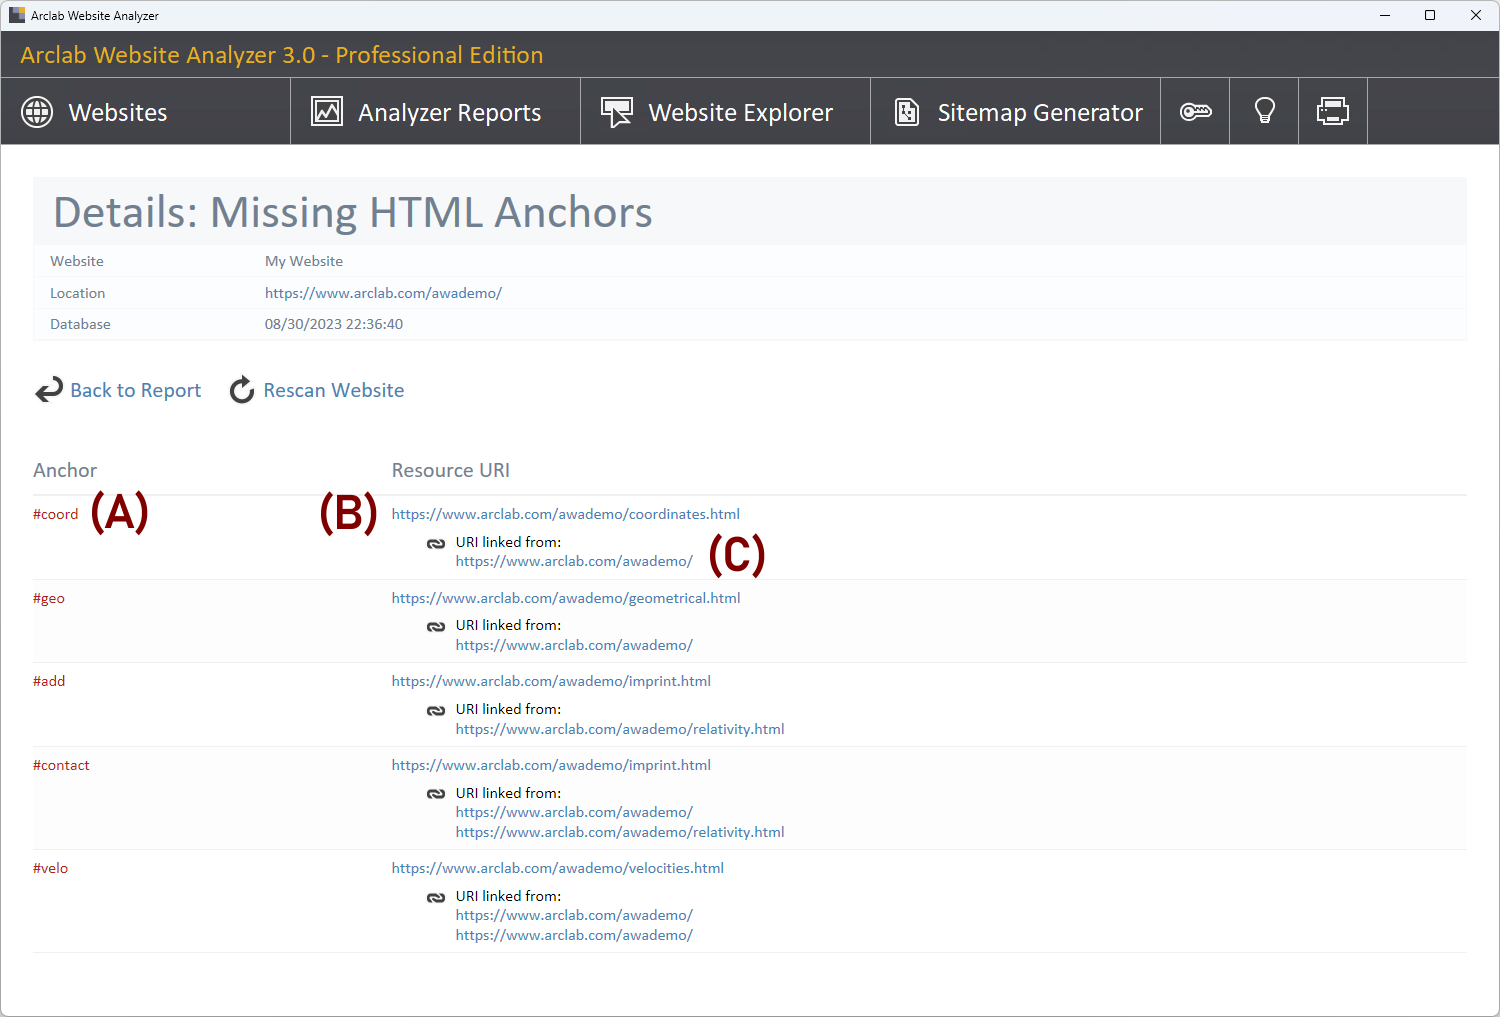 Details: Missing HTML Anchors